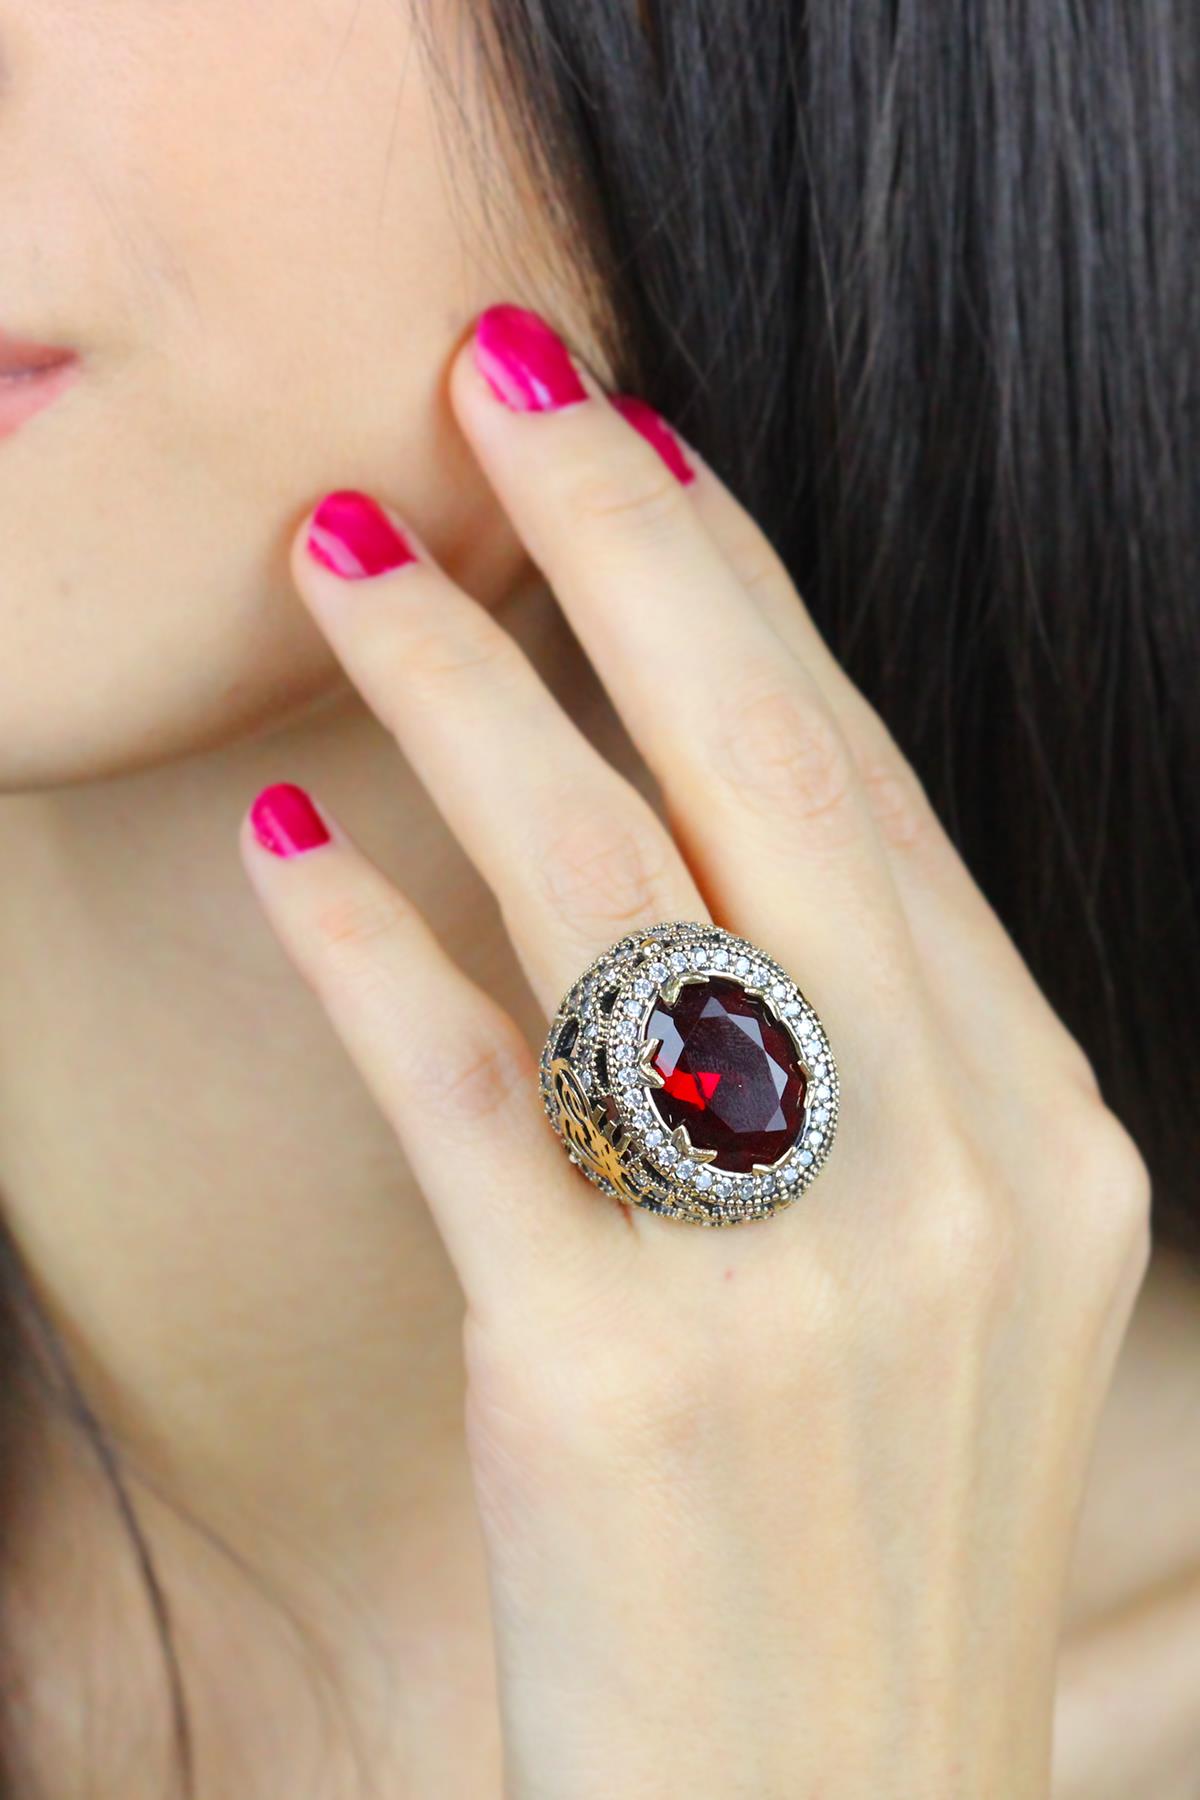 Sultani Series Authentic 925 Sterling Silver Women's Ring with Red Garnet Stone and Colorful Stone Options